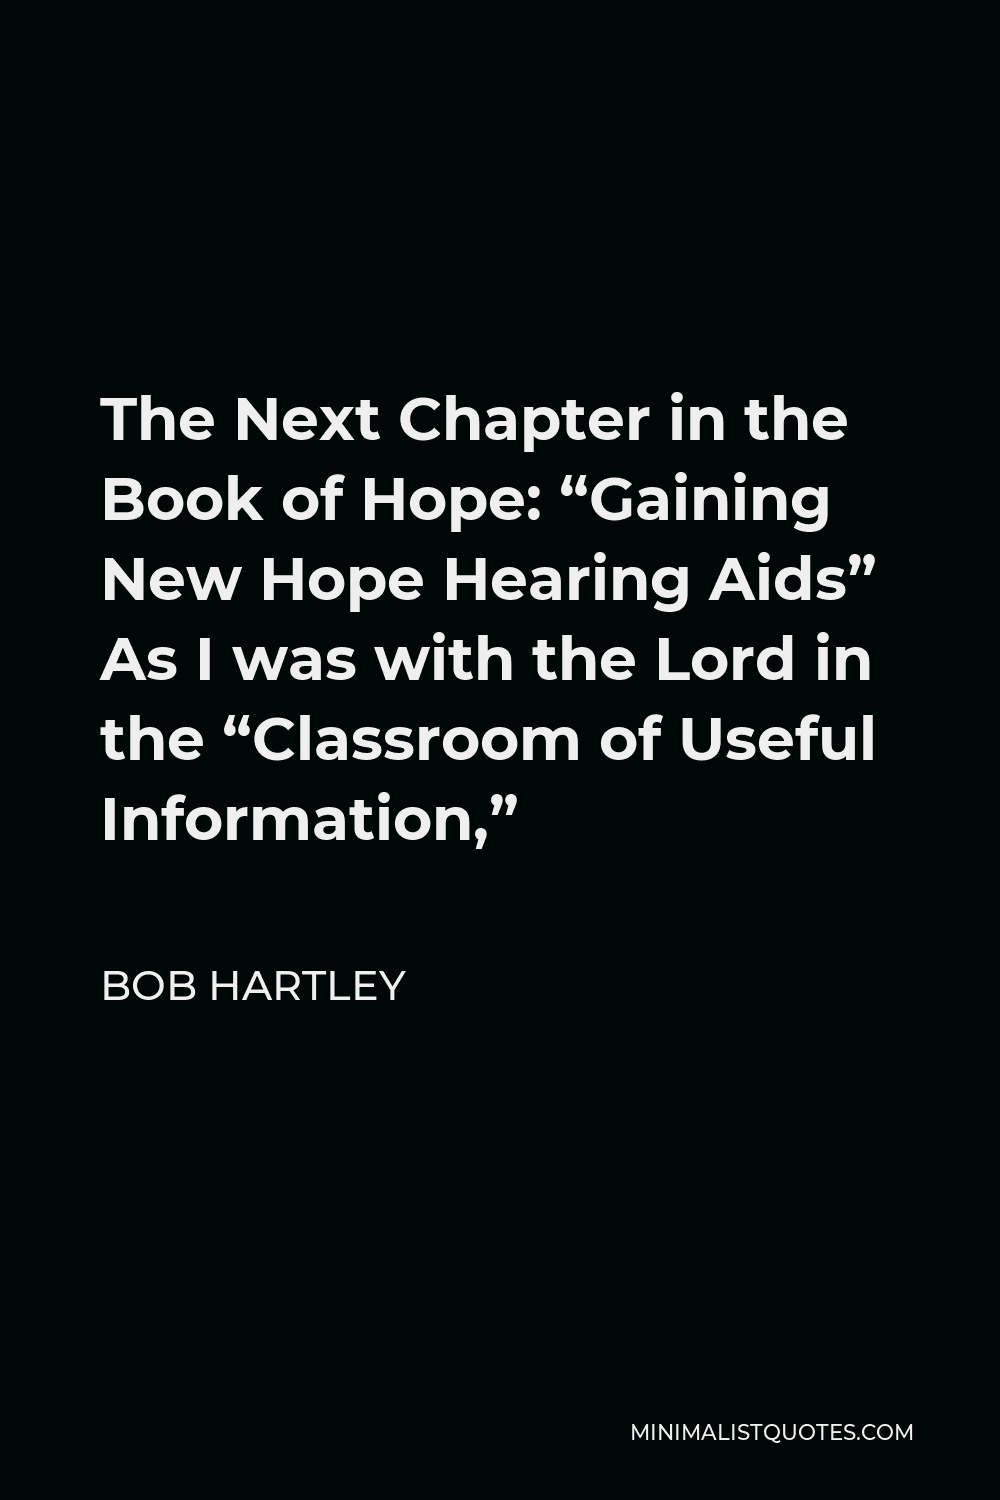 Bob Hartley Quote - The Next Chapter in the Book of Hope: “Gaining New Hope Hearing Aids” As I was with the Lord in the “Classroom of Useful Information,”